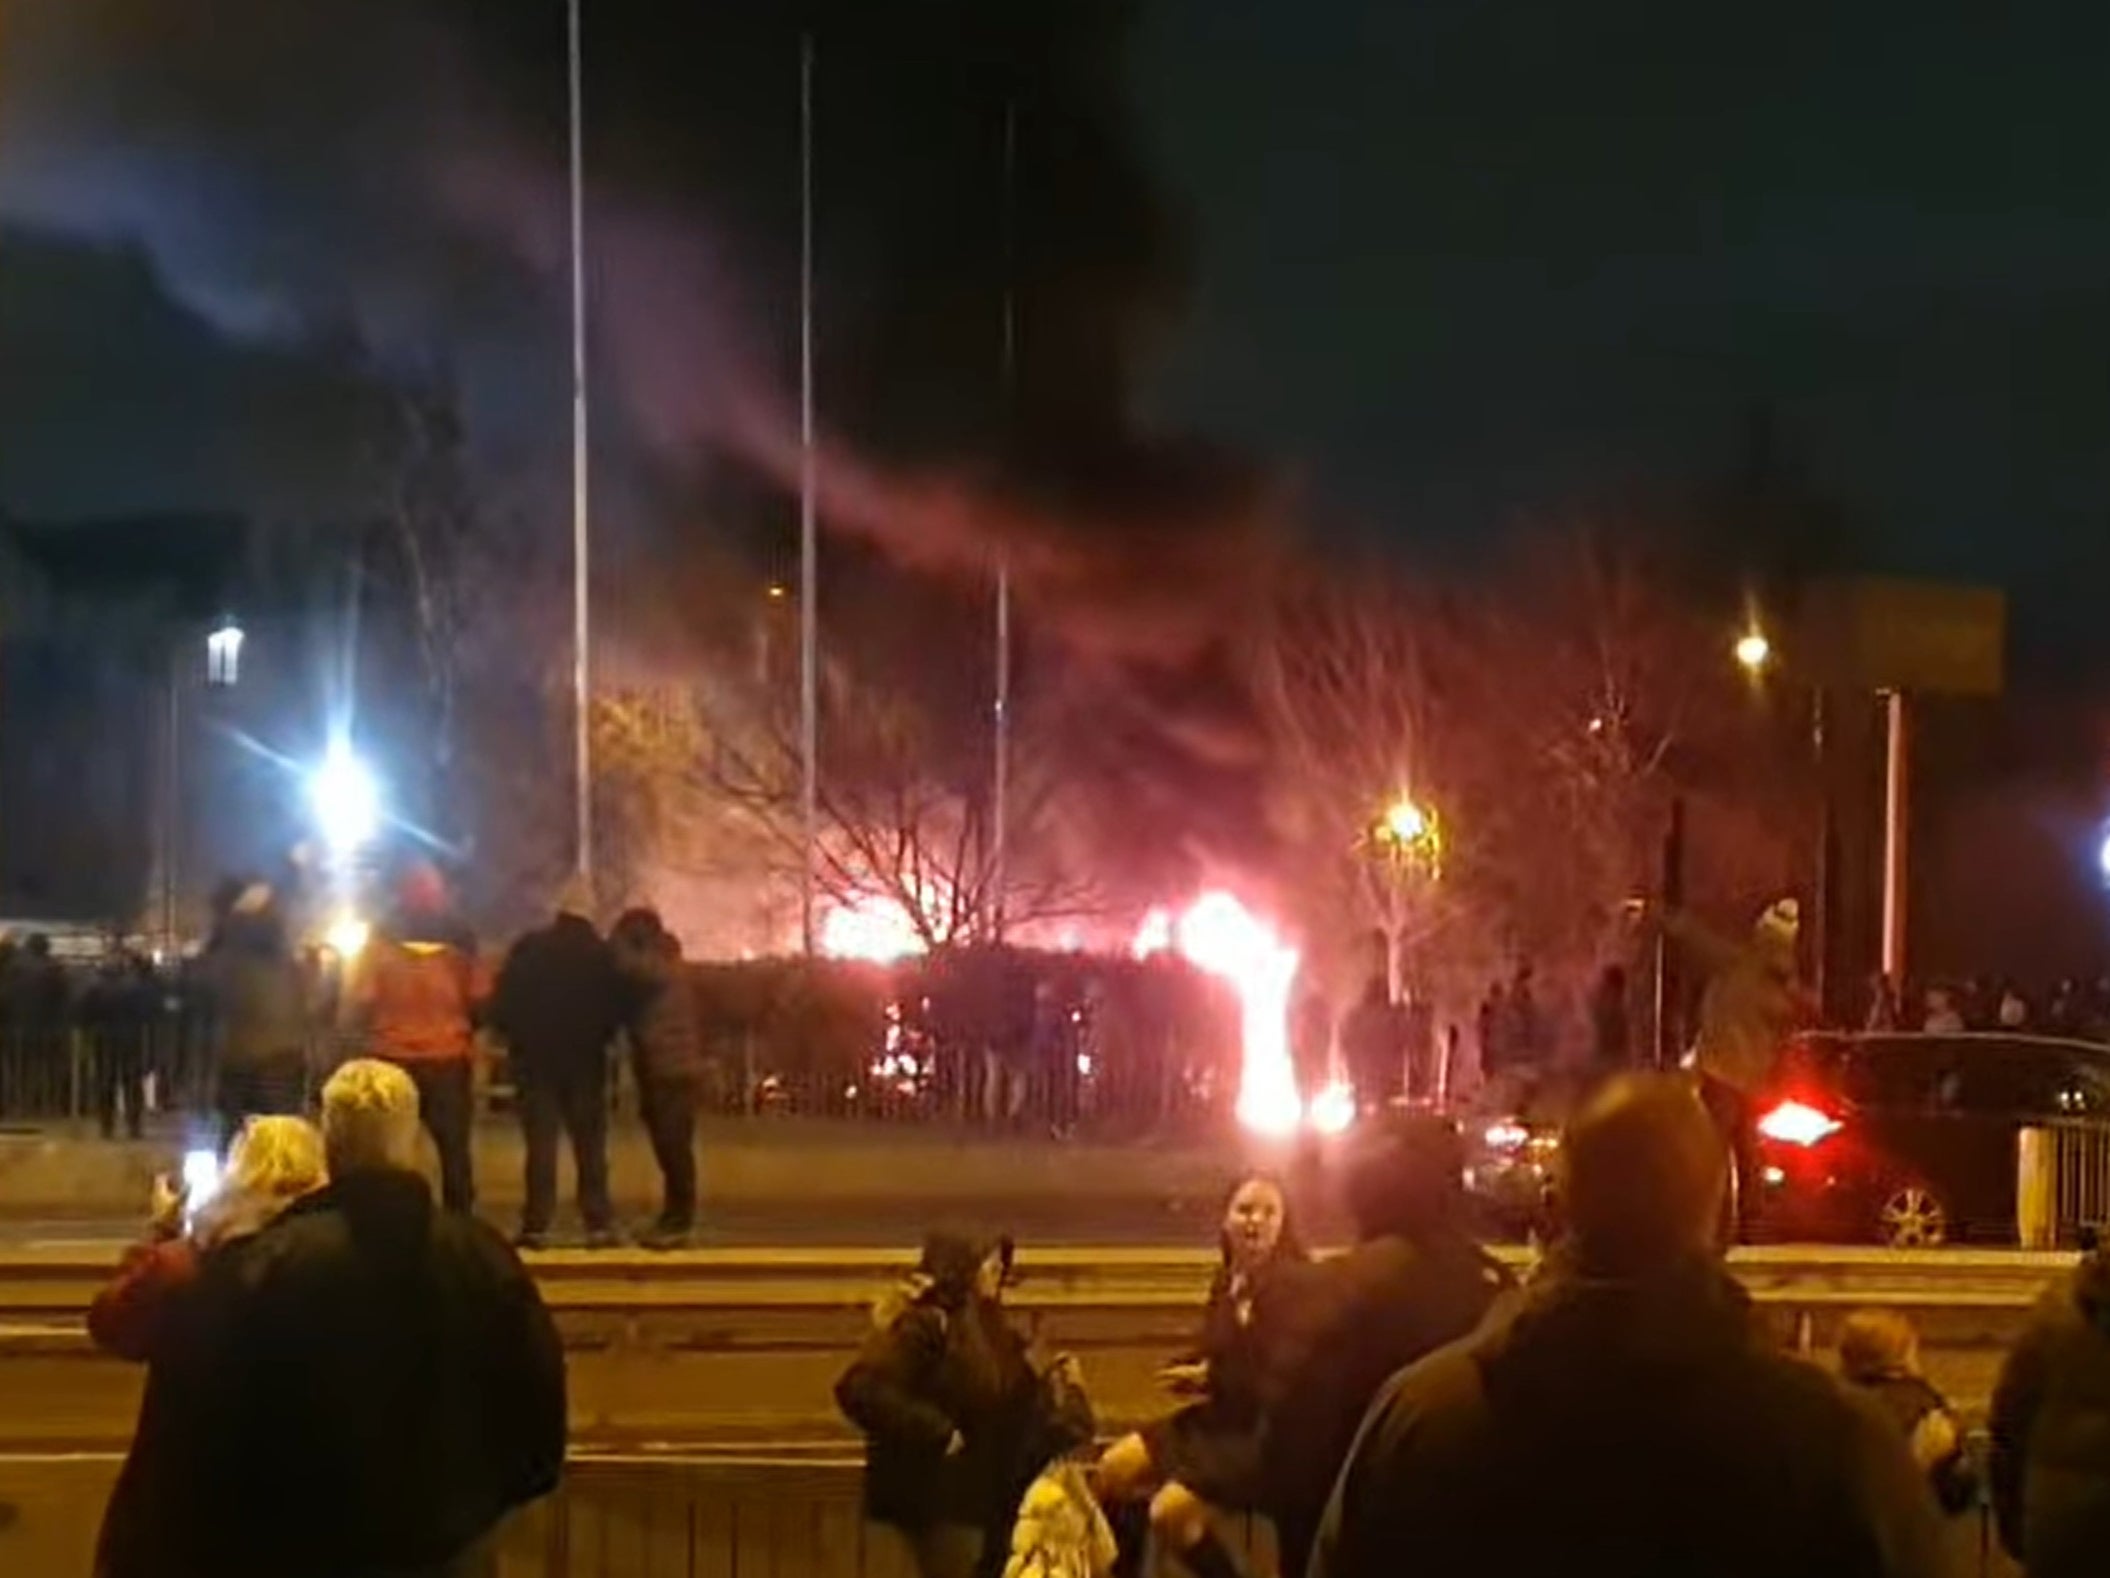 A police officer and two members of the public were hurt as missiles including lit fireworks were thrown